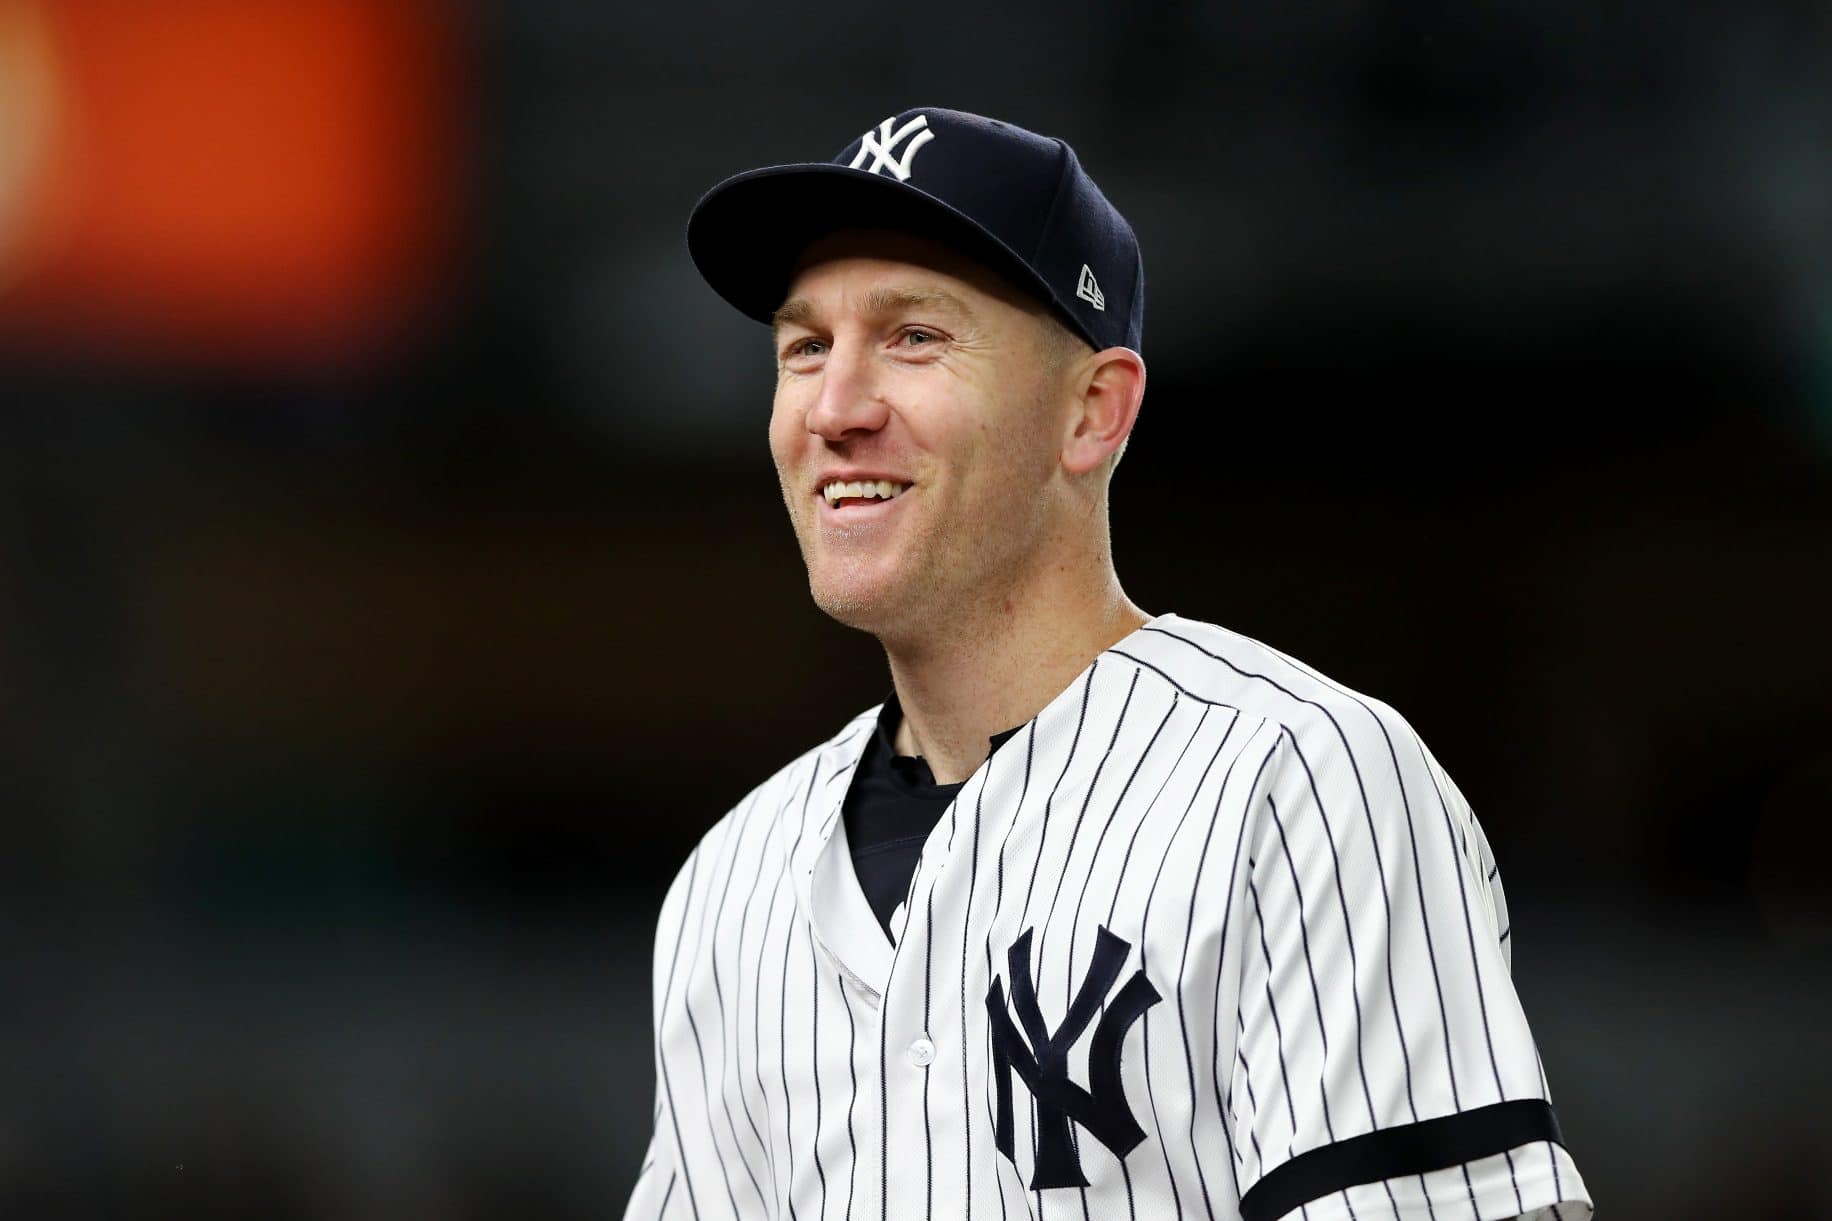 While the New York Yankees are flirting with the idea of trading for a third baseman, Todd Frazier sits on the open market, waiting.